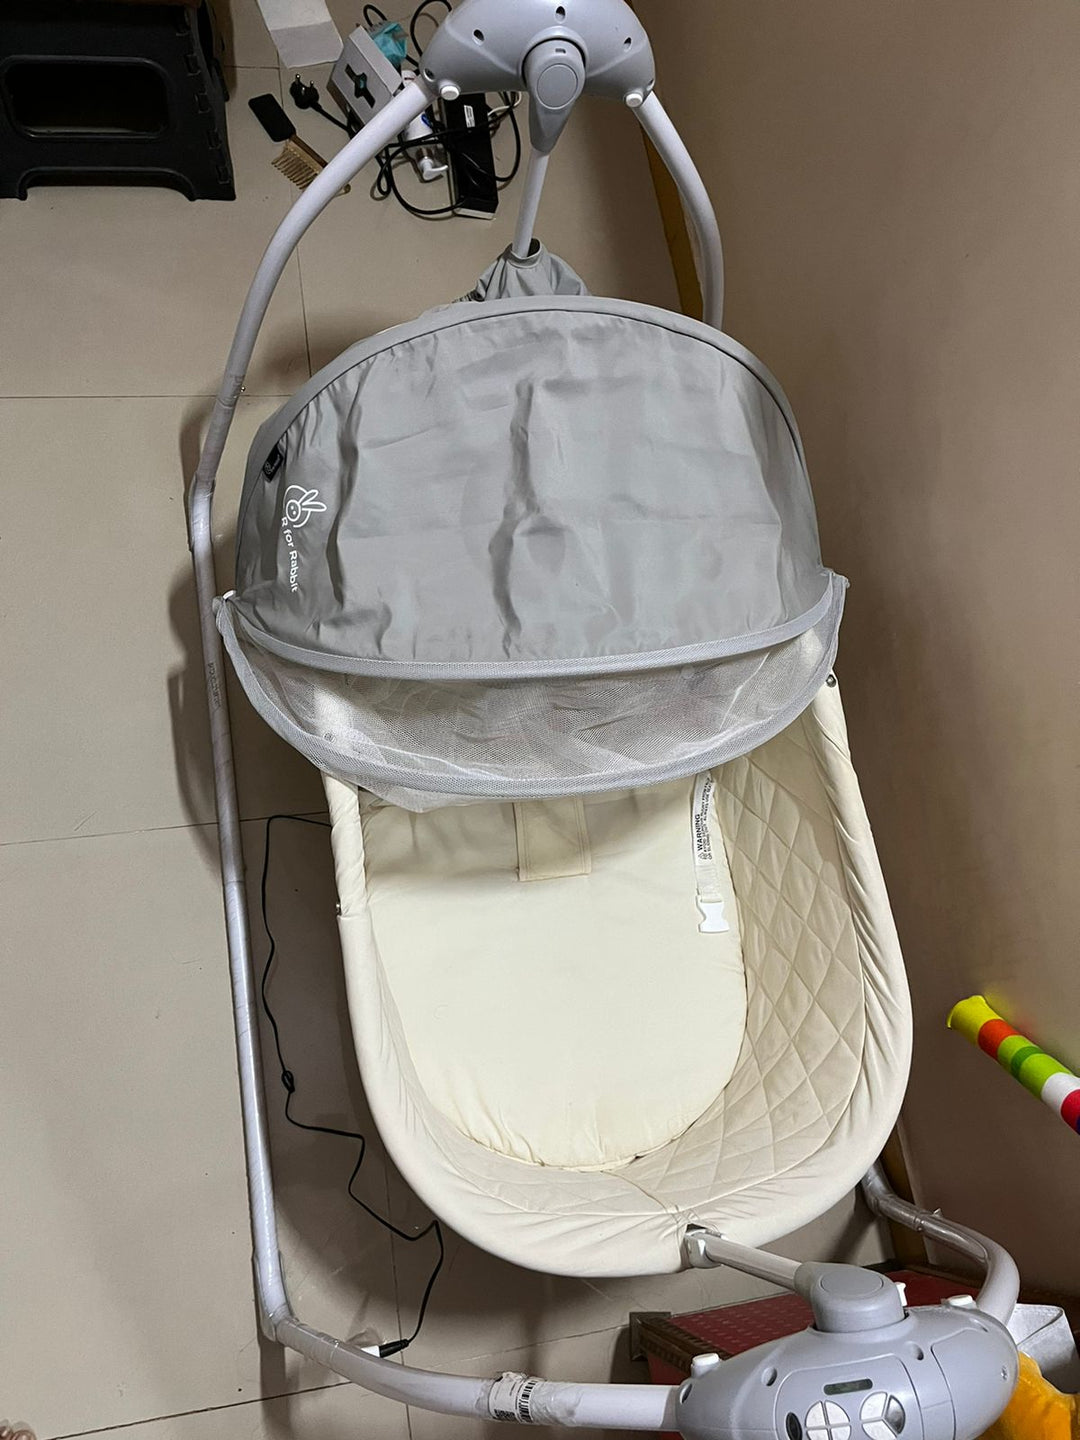 R for Rabbit Lullabies Automatic Electric Baby Swing Cradle